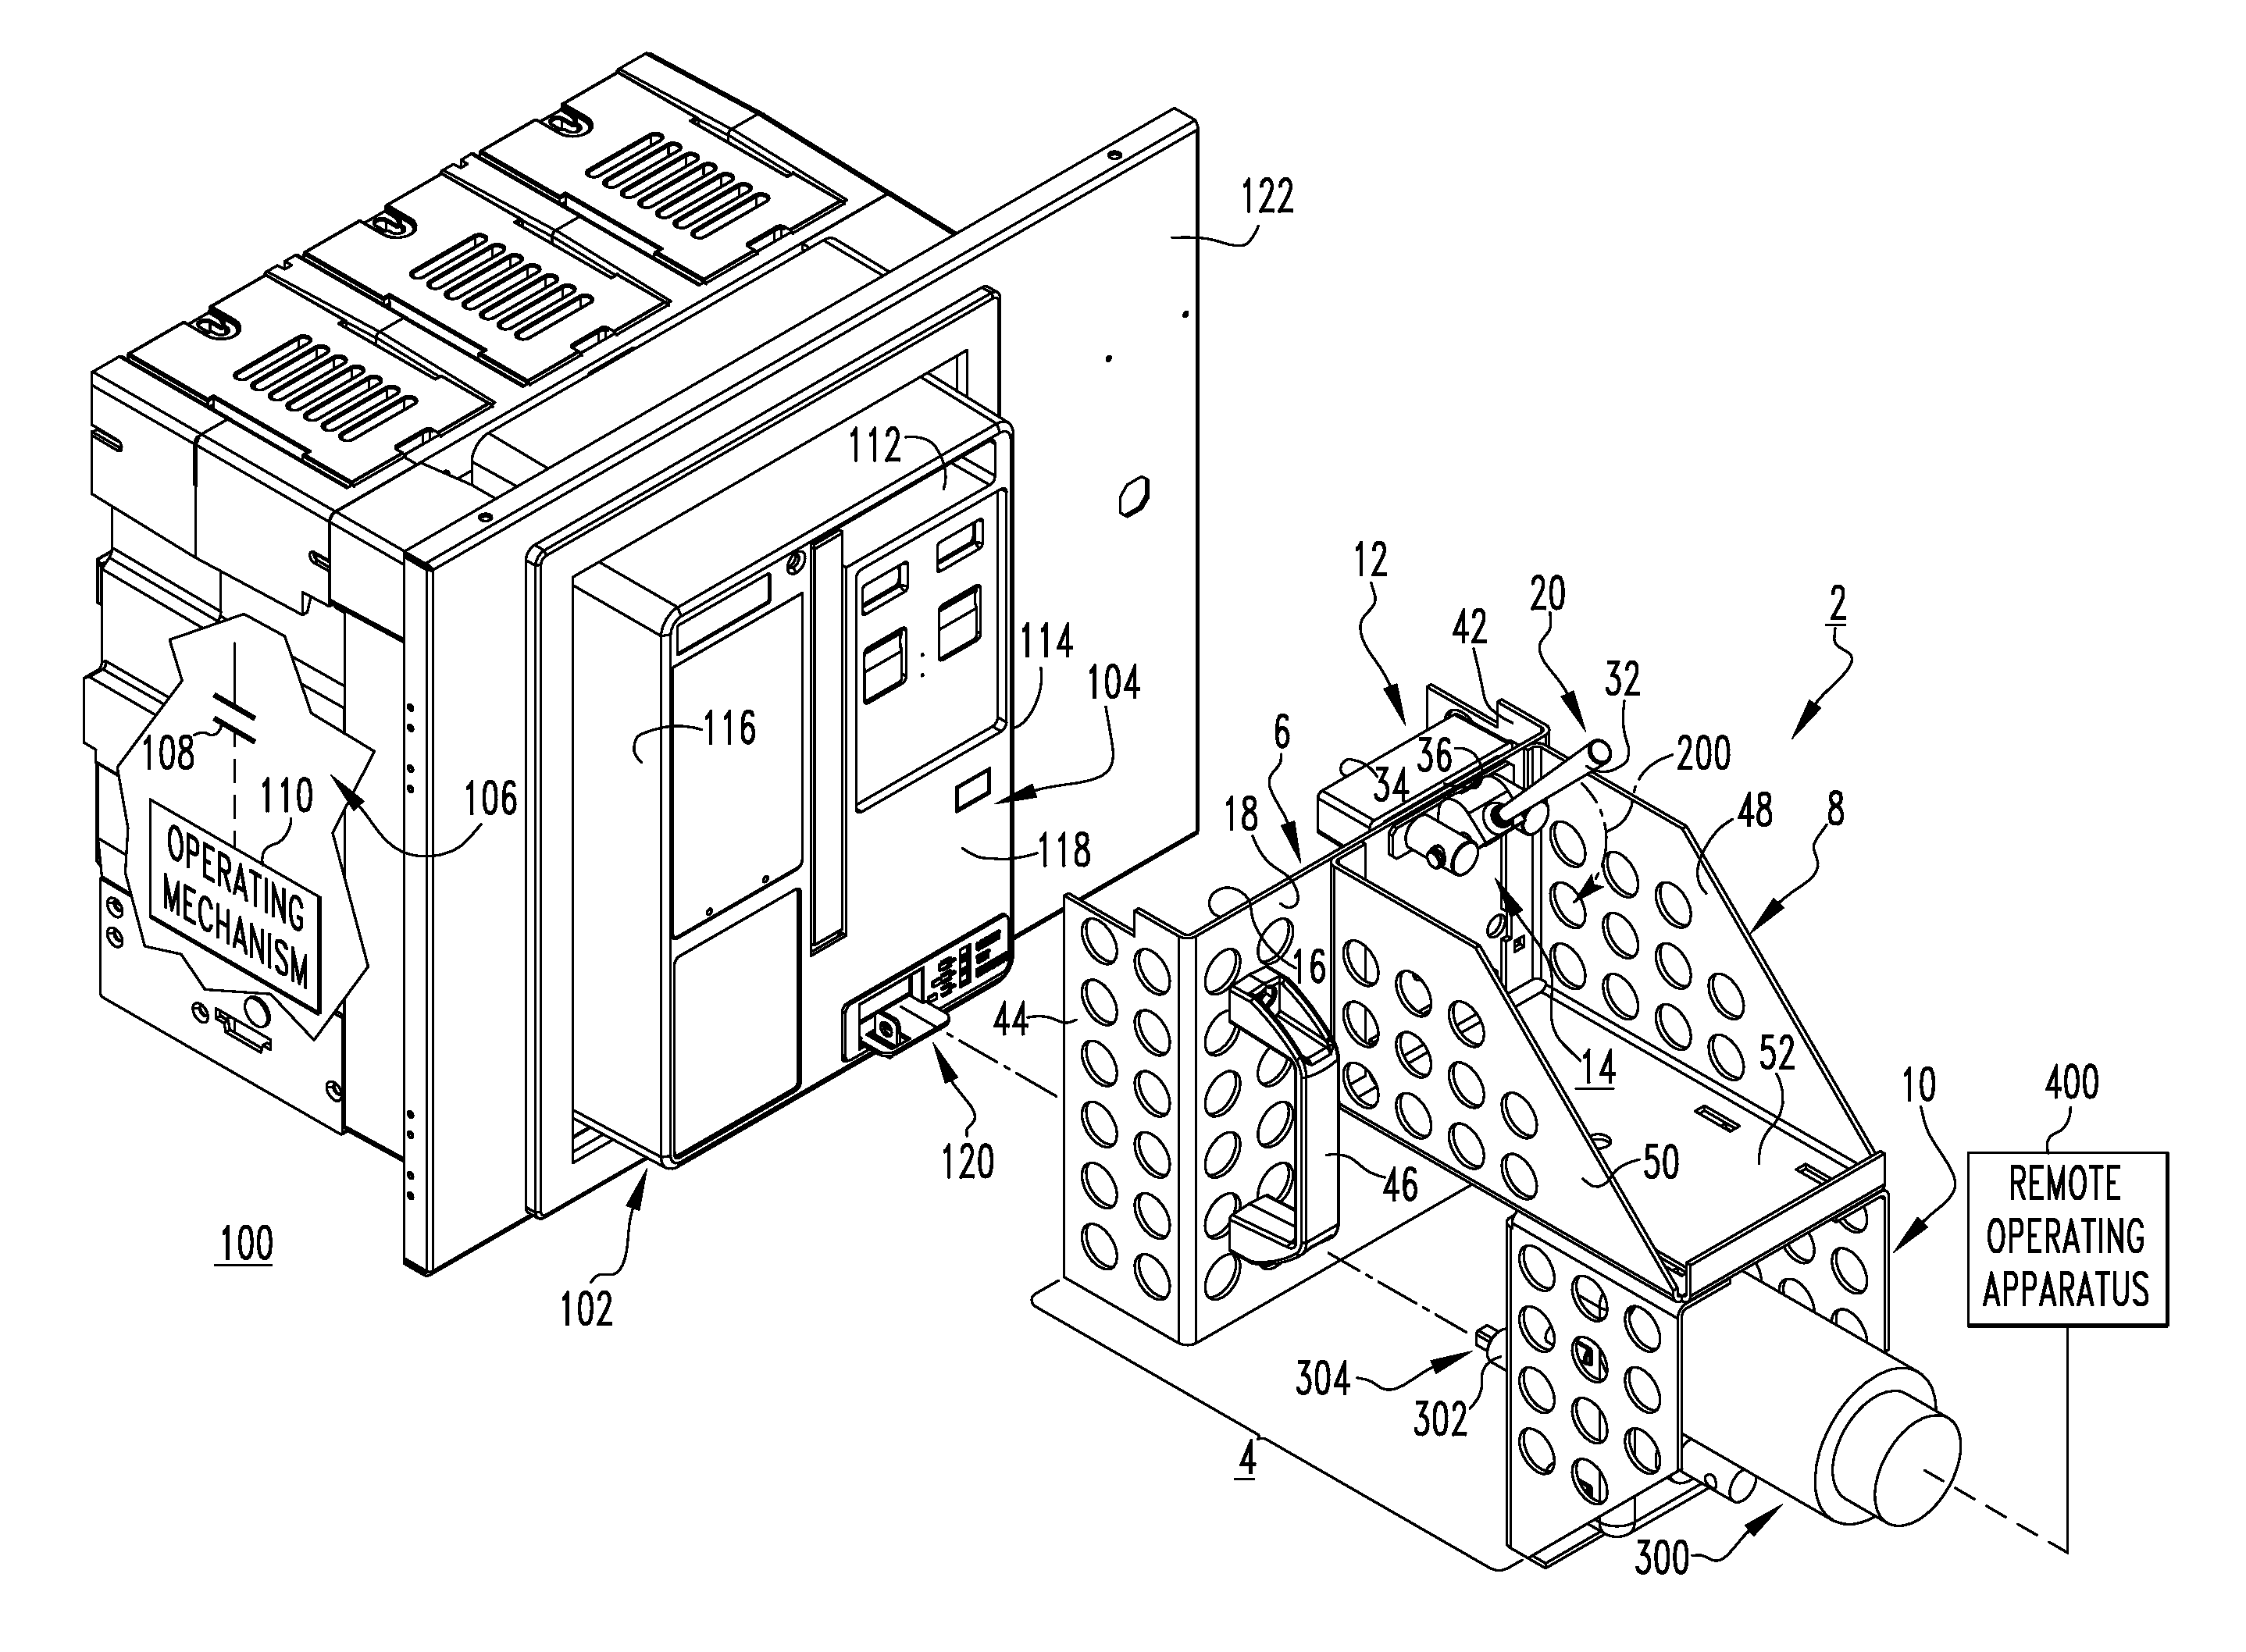 Electrical switching apparatus and mounting assembly therefor